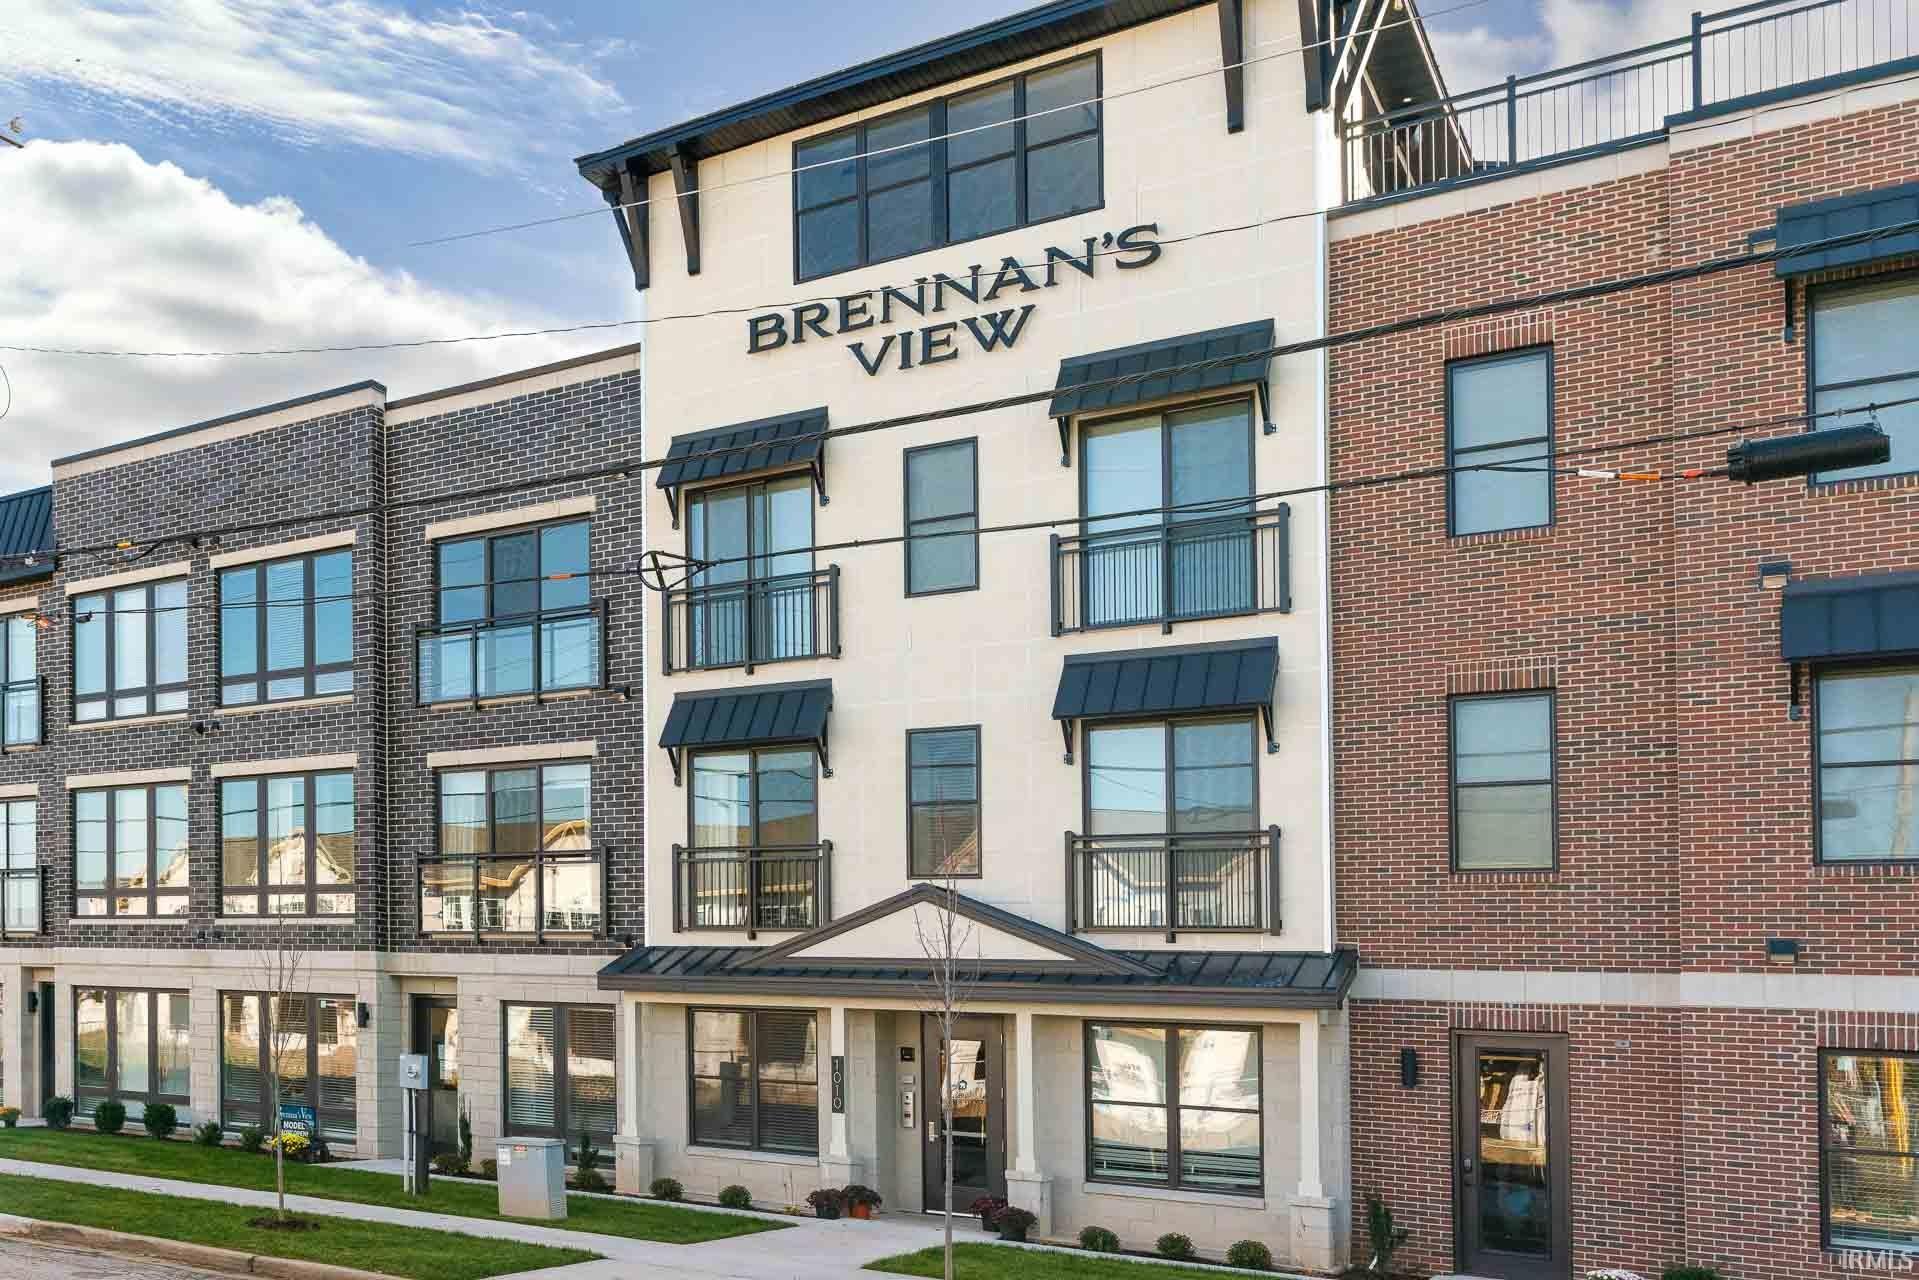 1010 Corby Unit 102 Boulevard Unit 102 Brennans View, South Bend, IN 46617